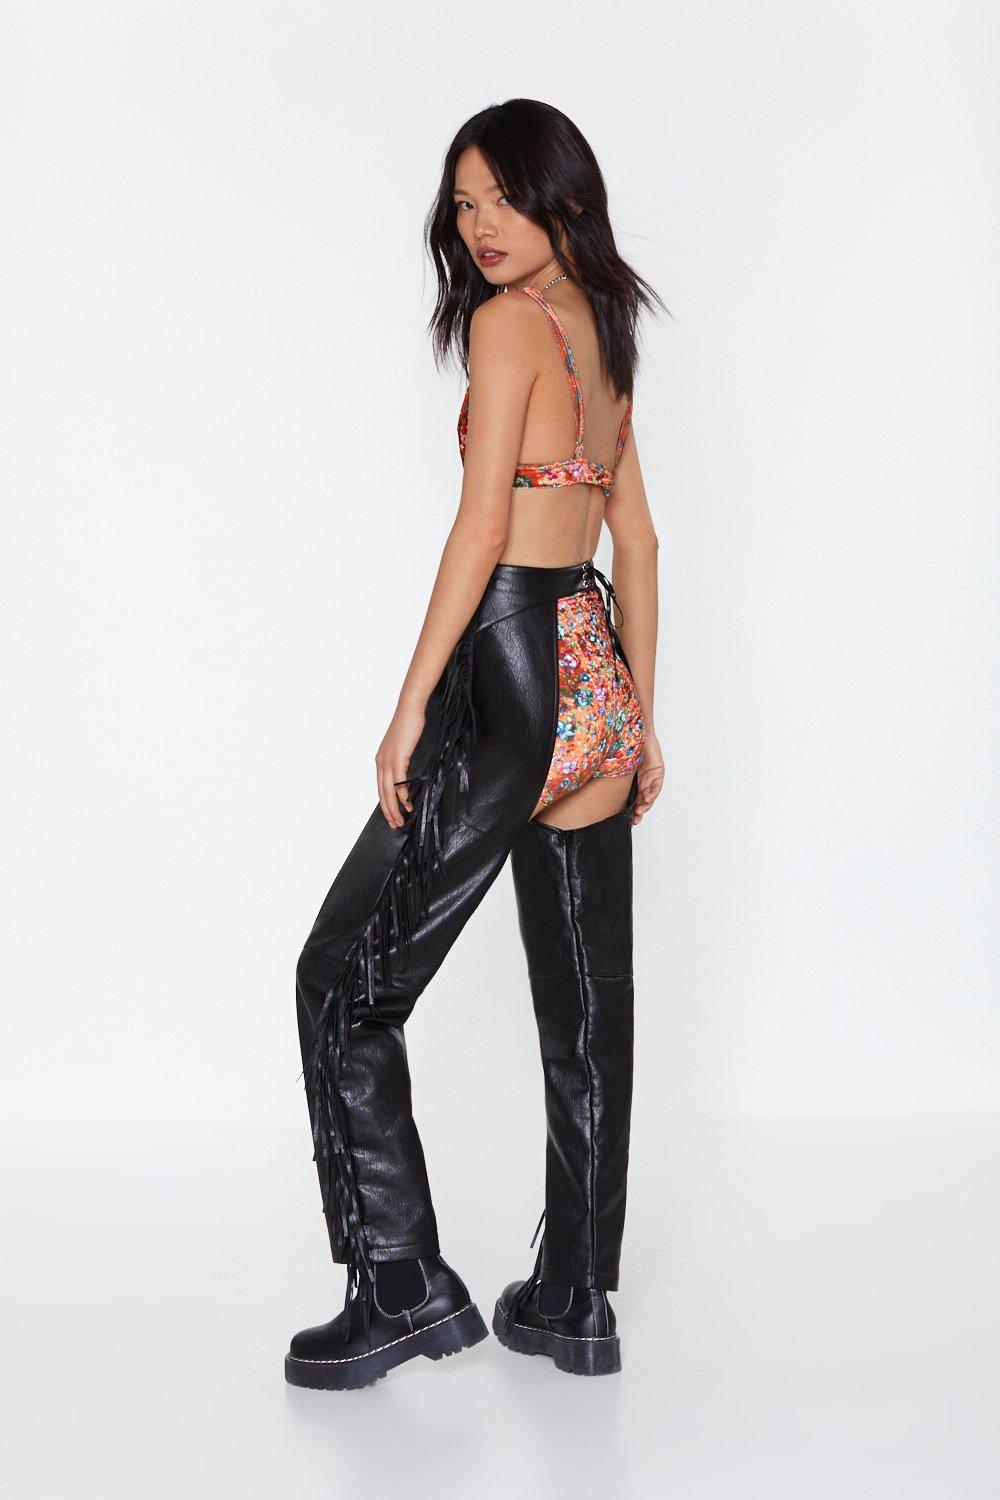 The Sway Forward Fringe Faux Leather, Faux Leather Chaps